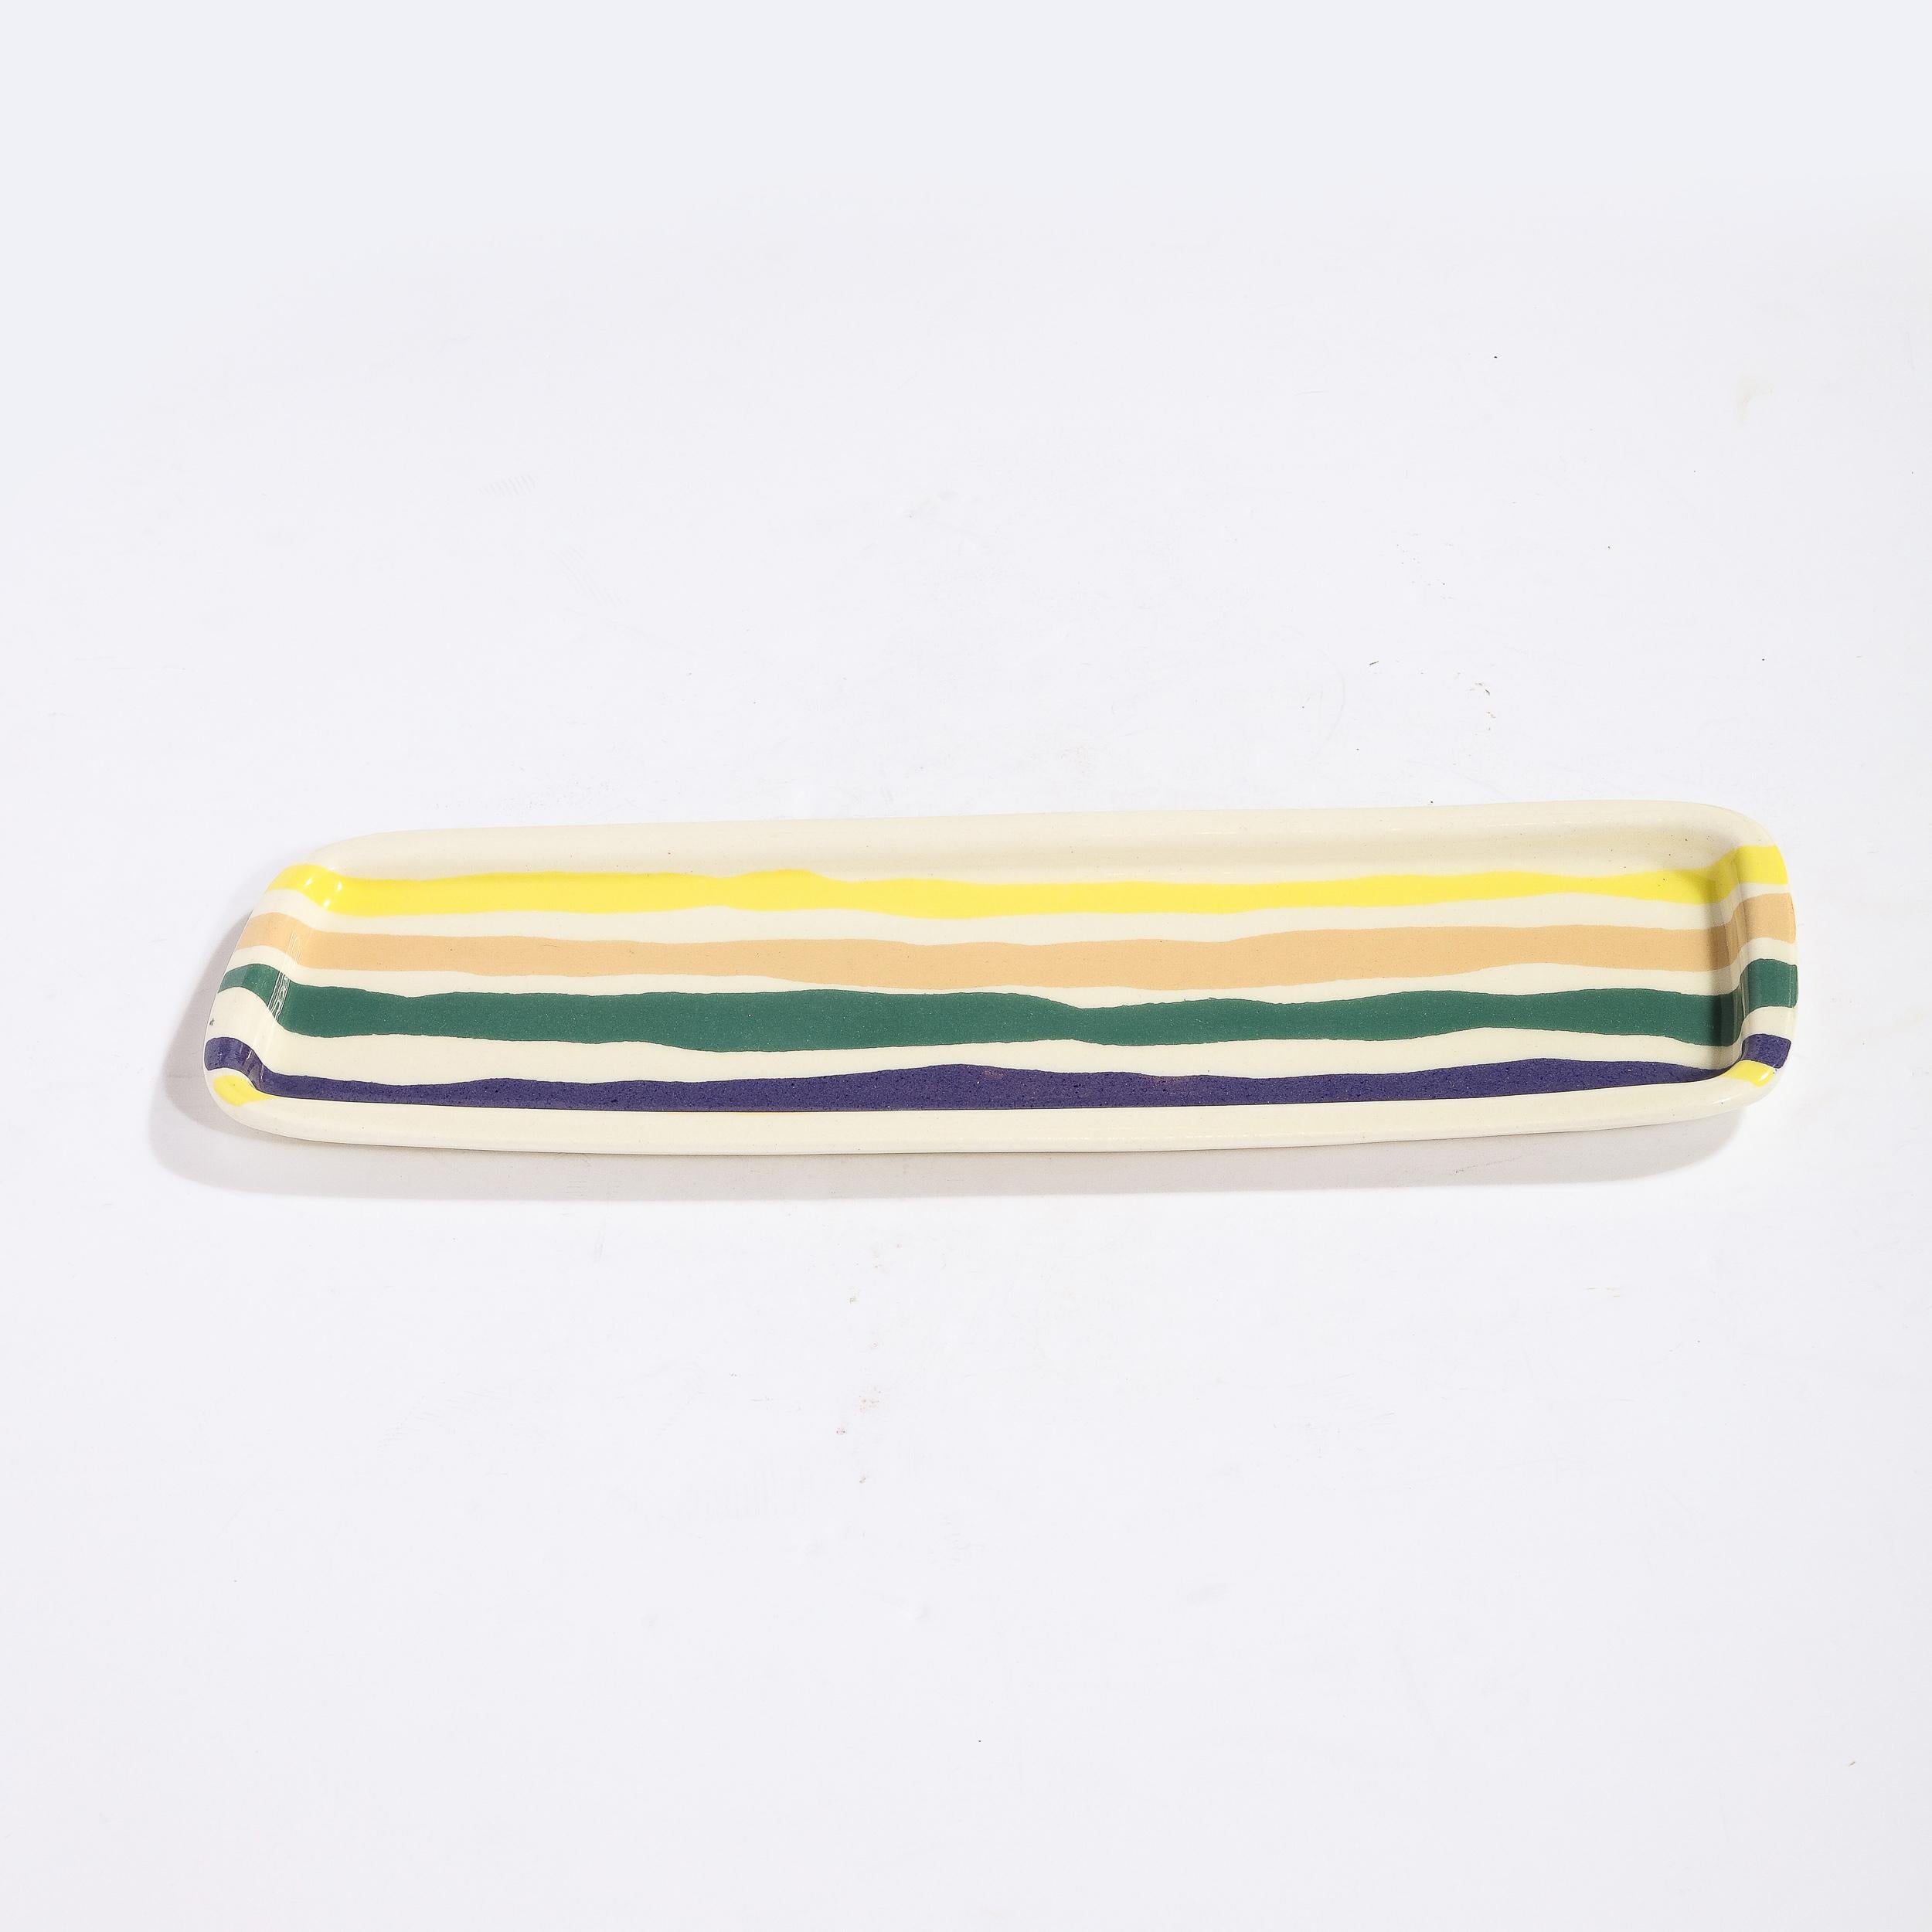 Elongated Serving Platter in Hand-Painted Ceramic by Jurg Lanrein  For Sale 3